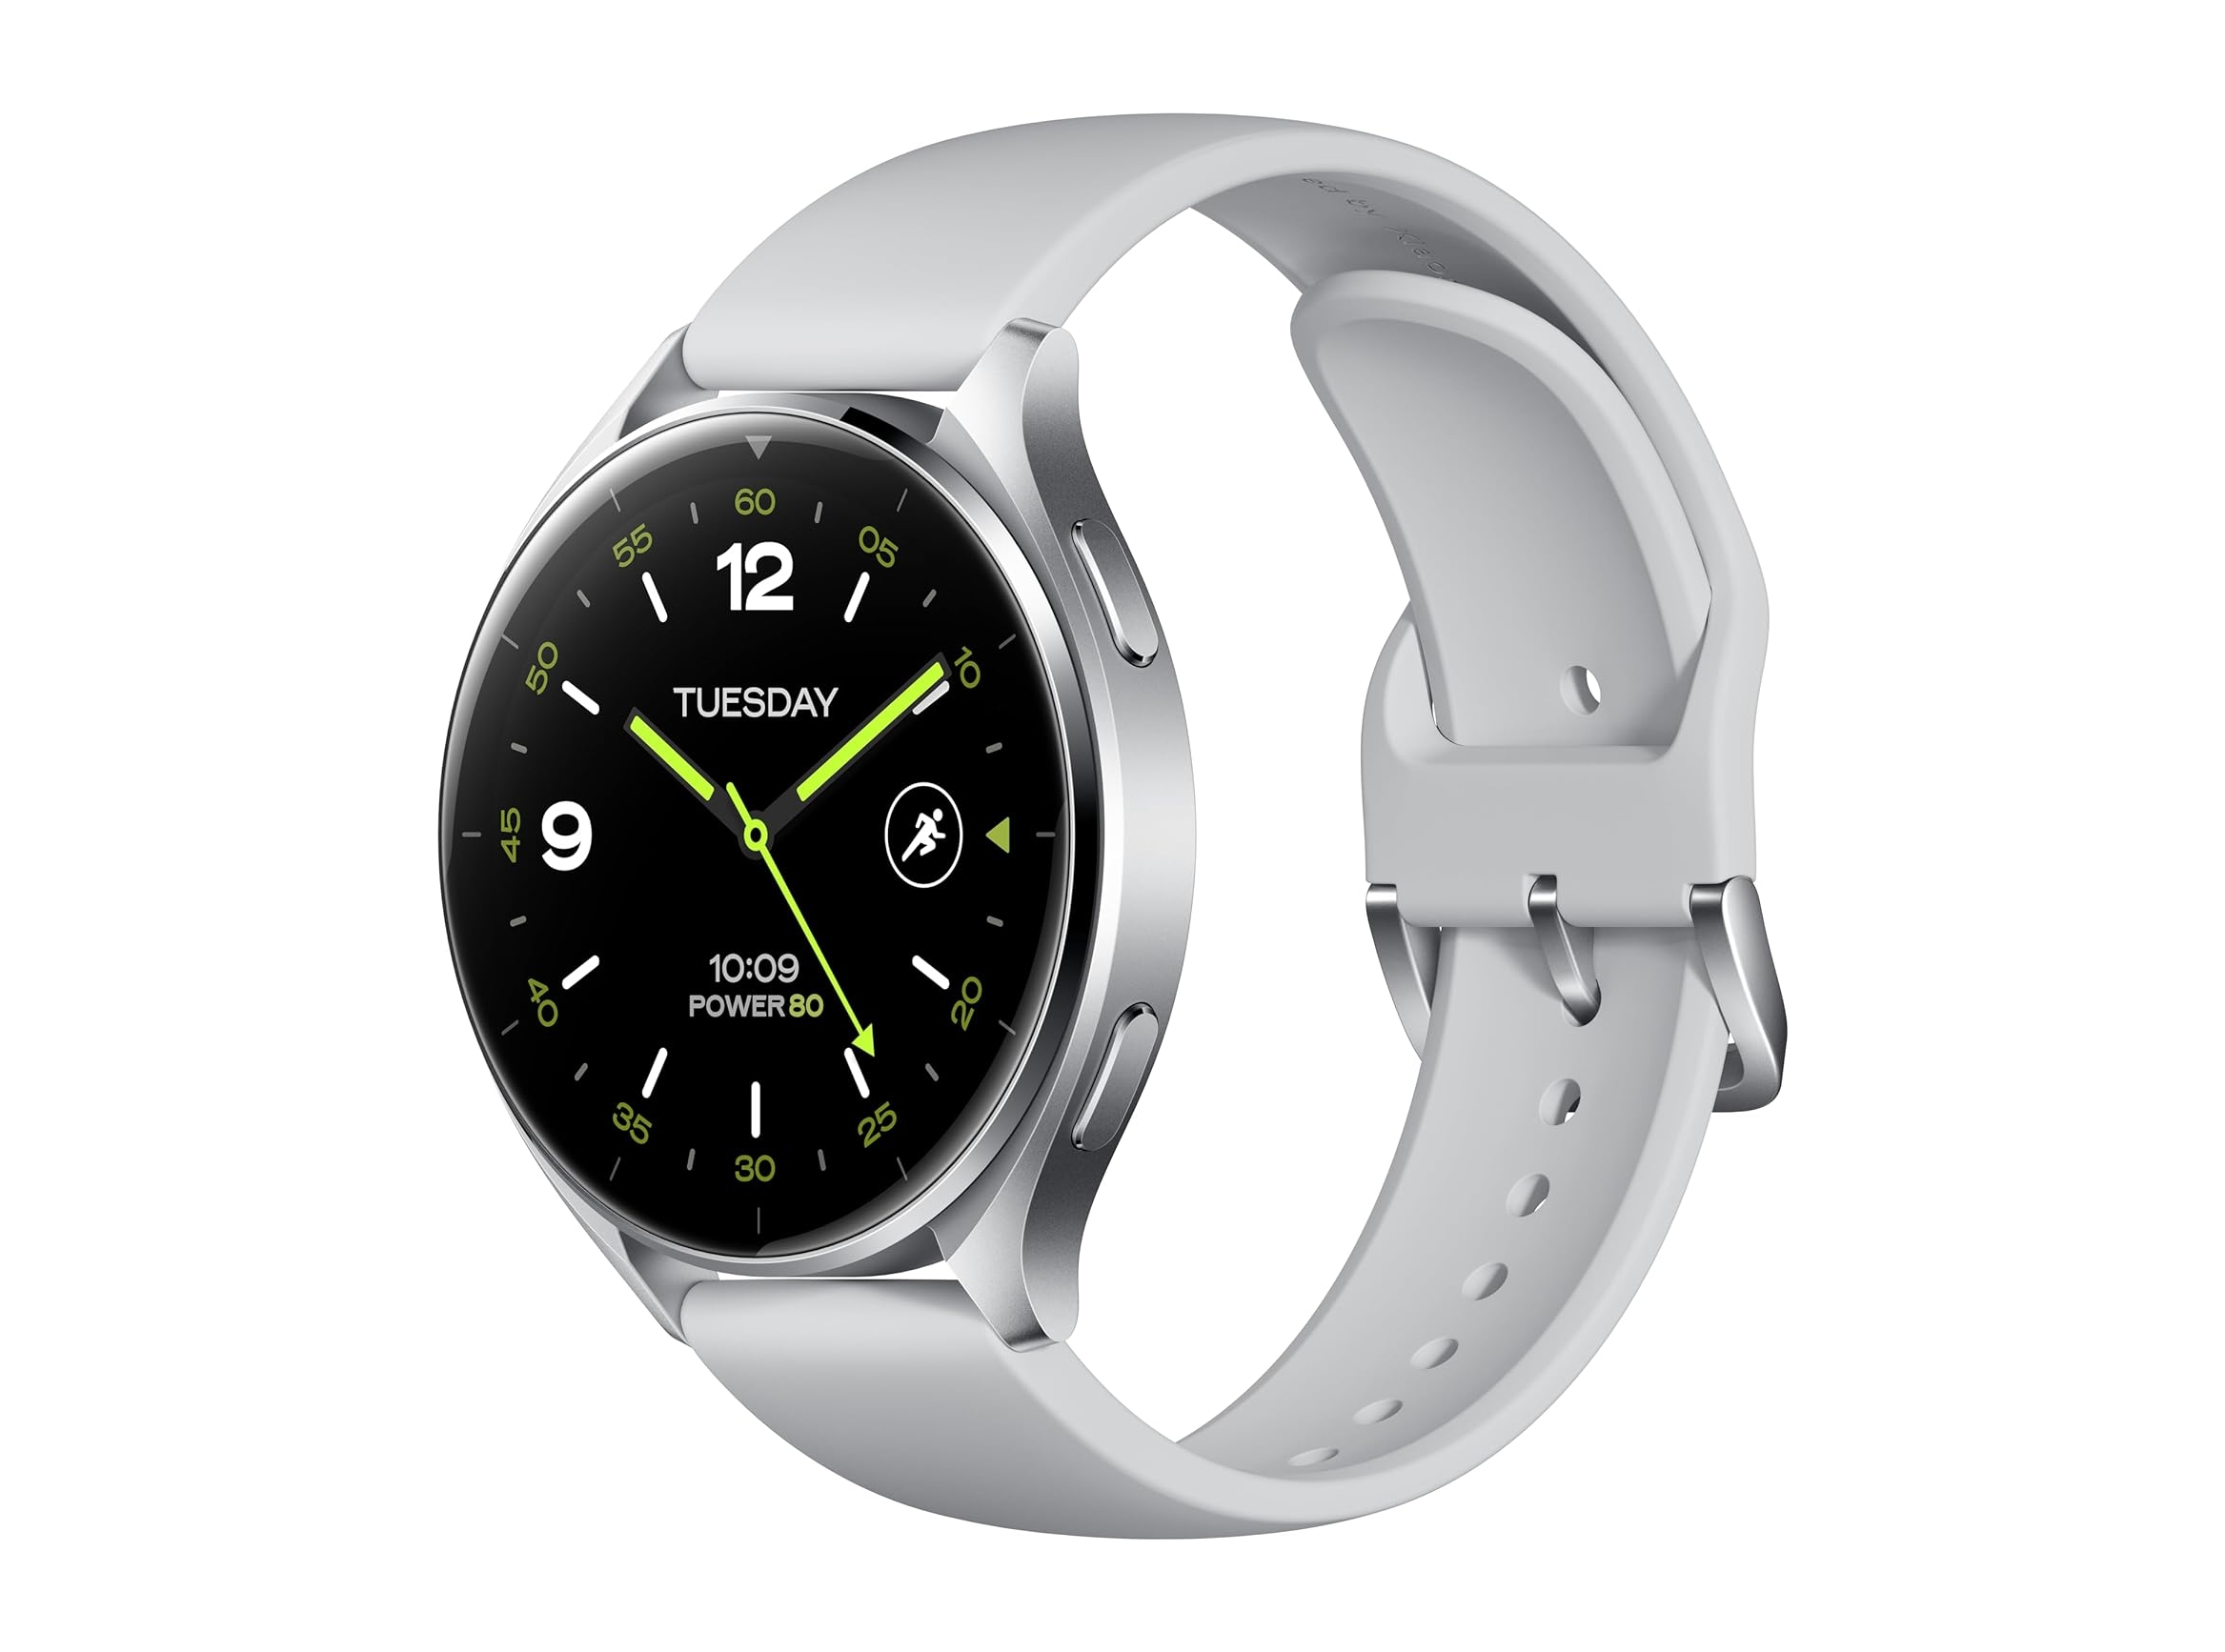 Days before the announcement: the Xiaomi Watch 2 has appeared on Amazon in Europe